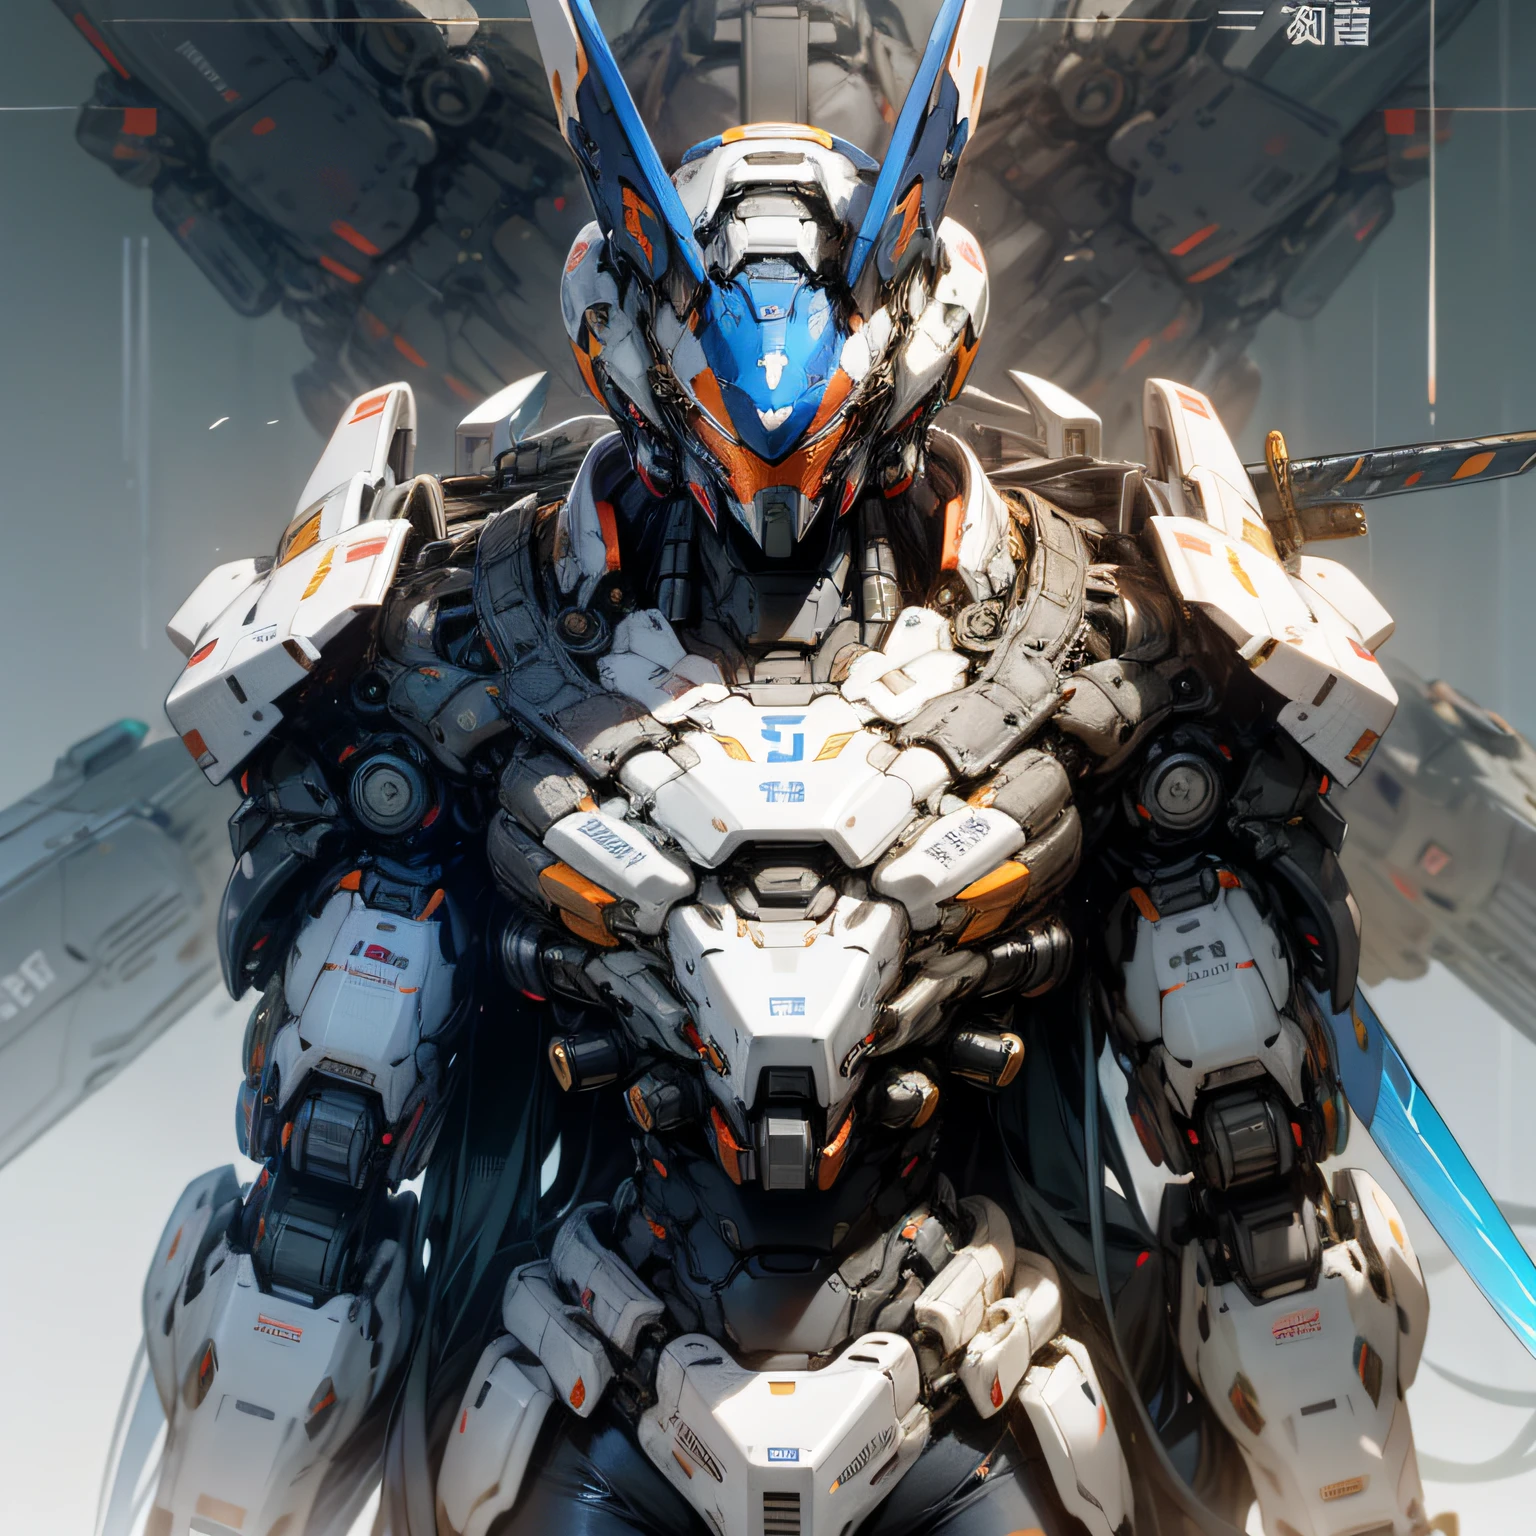 full bodyesbian、Side Body、white color mecha、Blue accents、Carry a giant sword、mecha asthetic、Futuristic mech style，ruins、Long leguscular、Look up、Grand background --auto